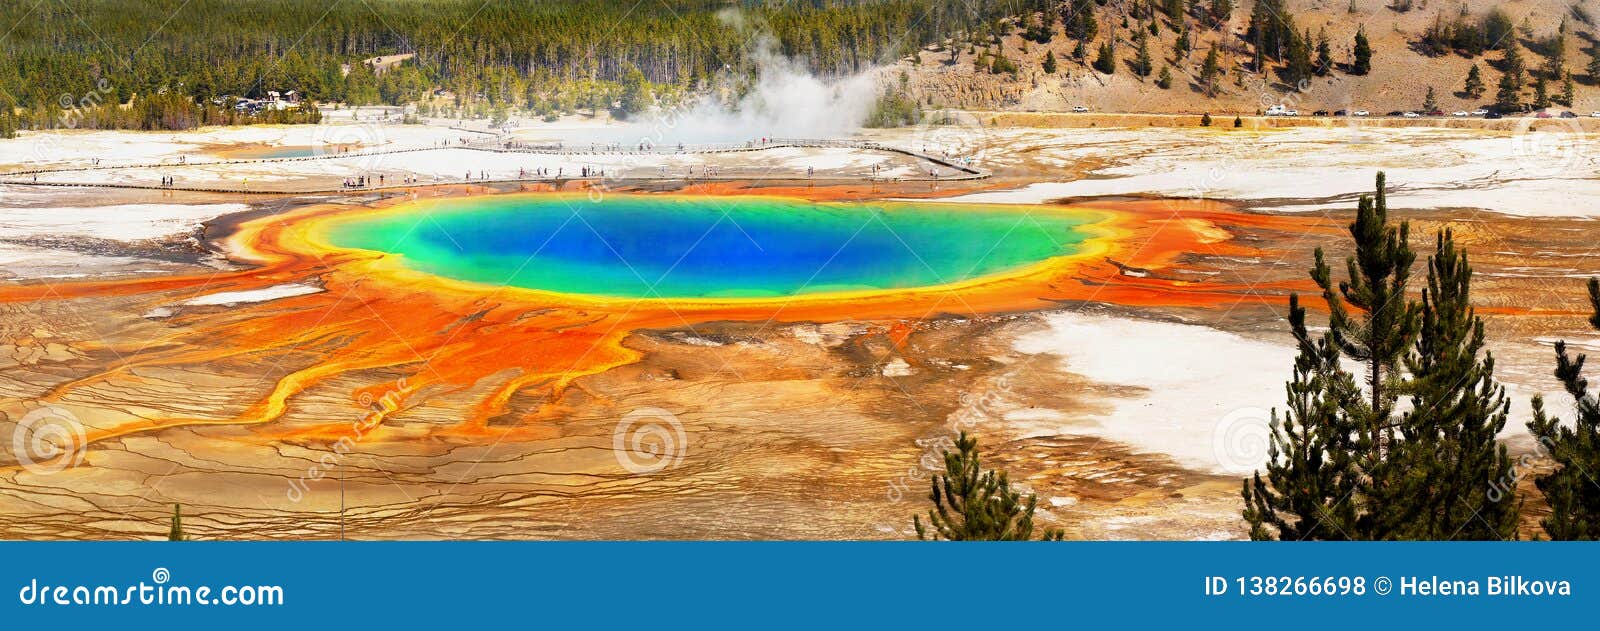 us national parks, yellowstone national park